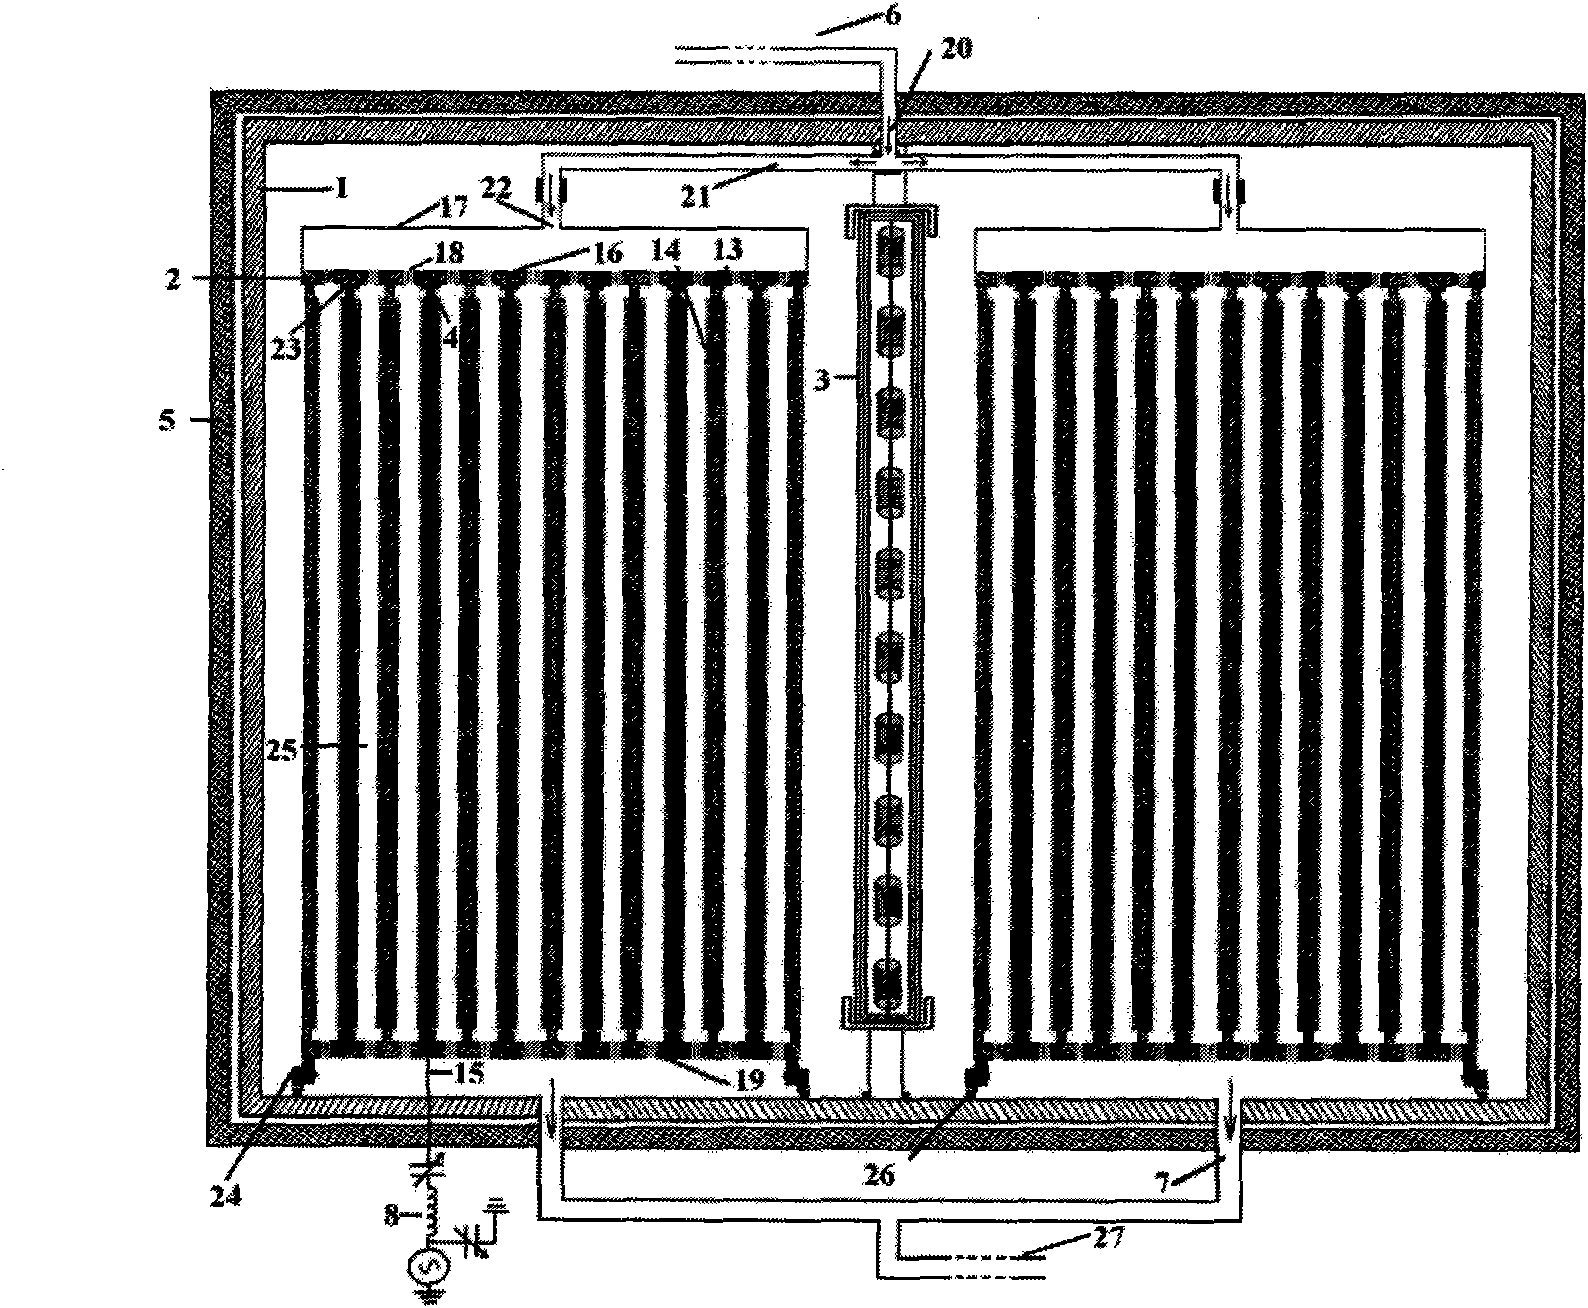 PECVD system with internal heater